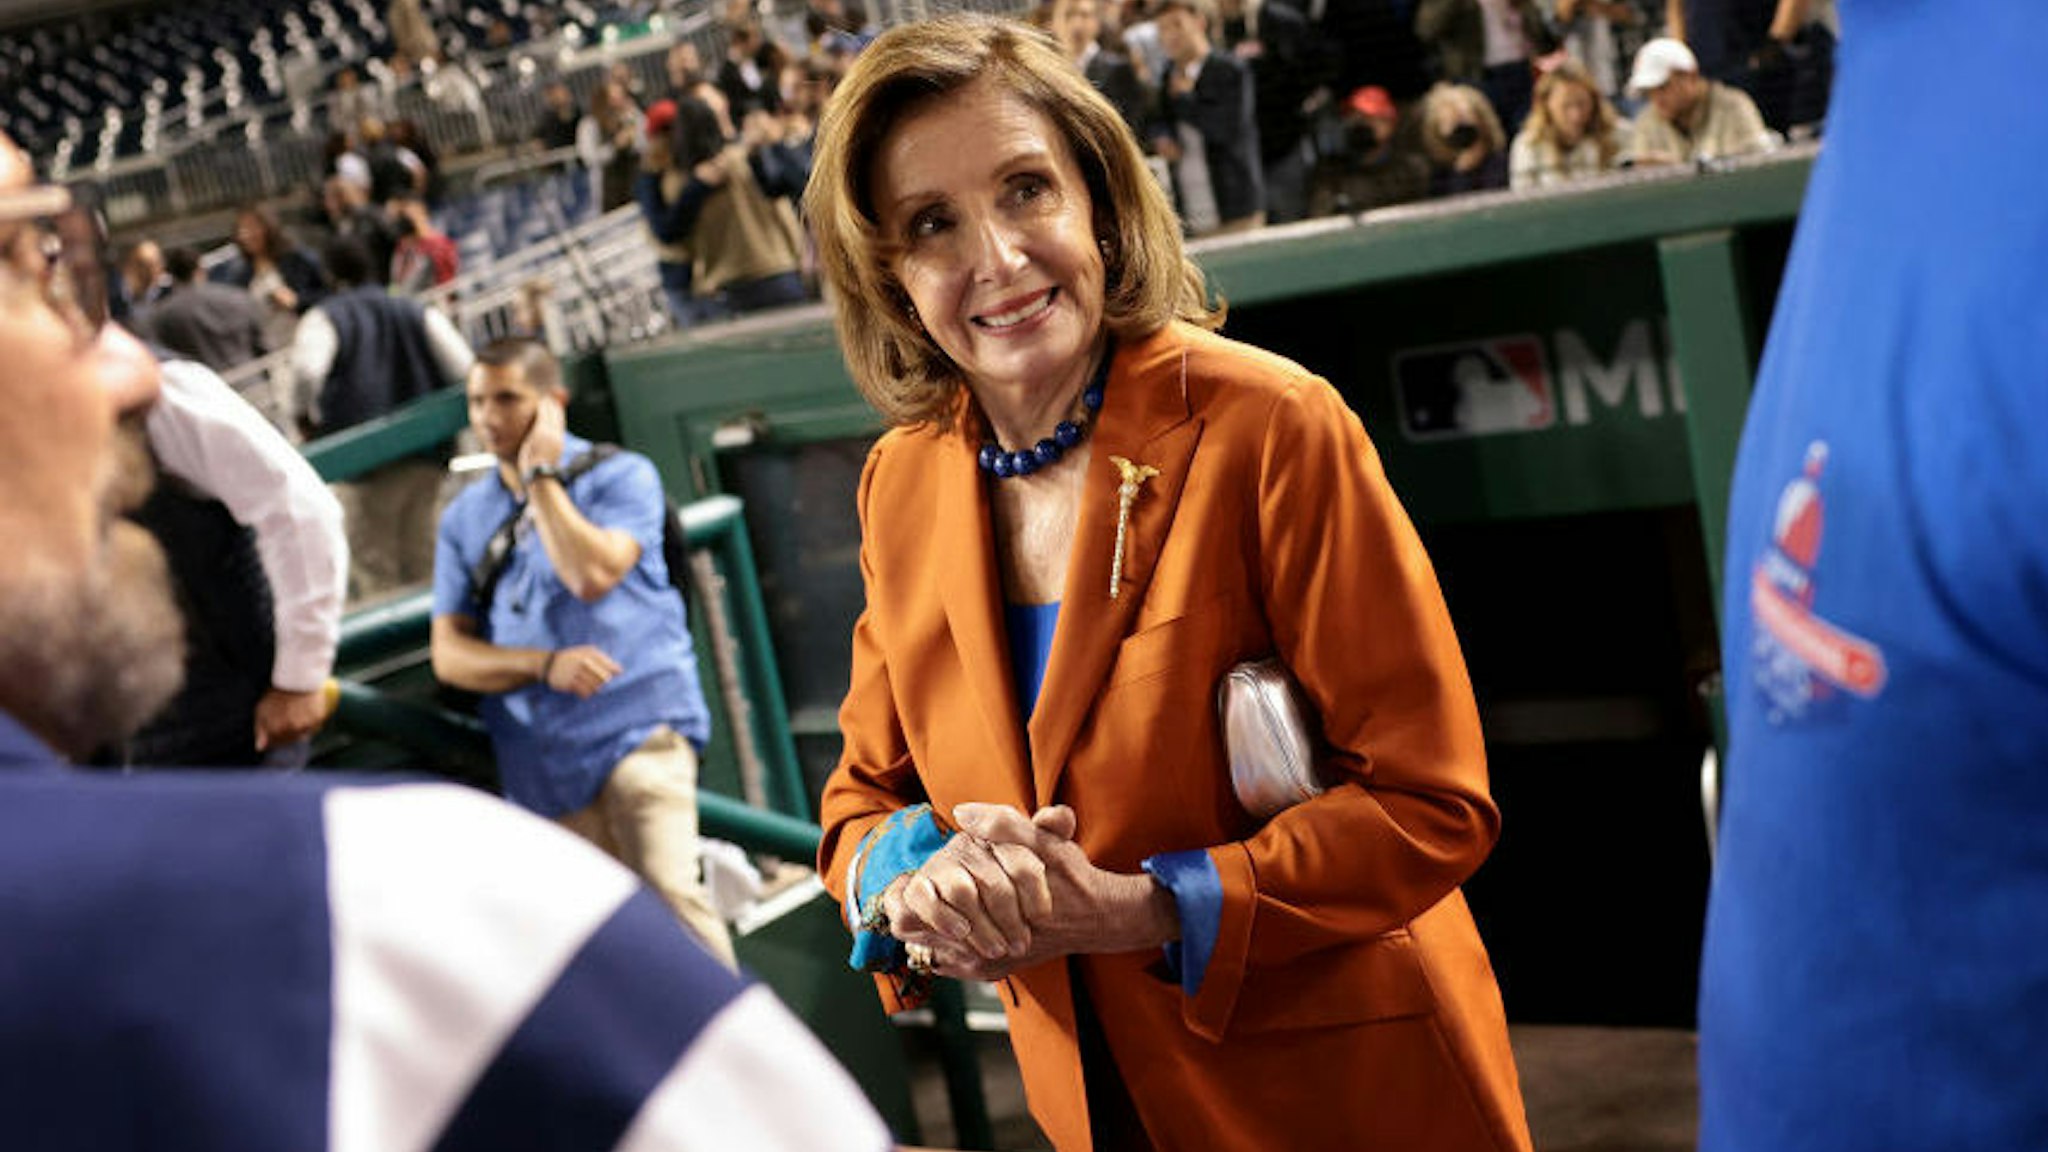 House Speaker Nancy Pelosi (D-CA) congratulates members of the Democratic team following the Congressional baseball game at Nationals Park September 29, 2021 in Washington, DC.